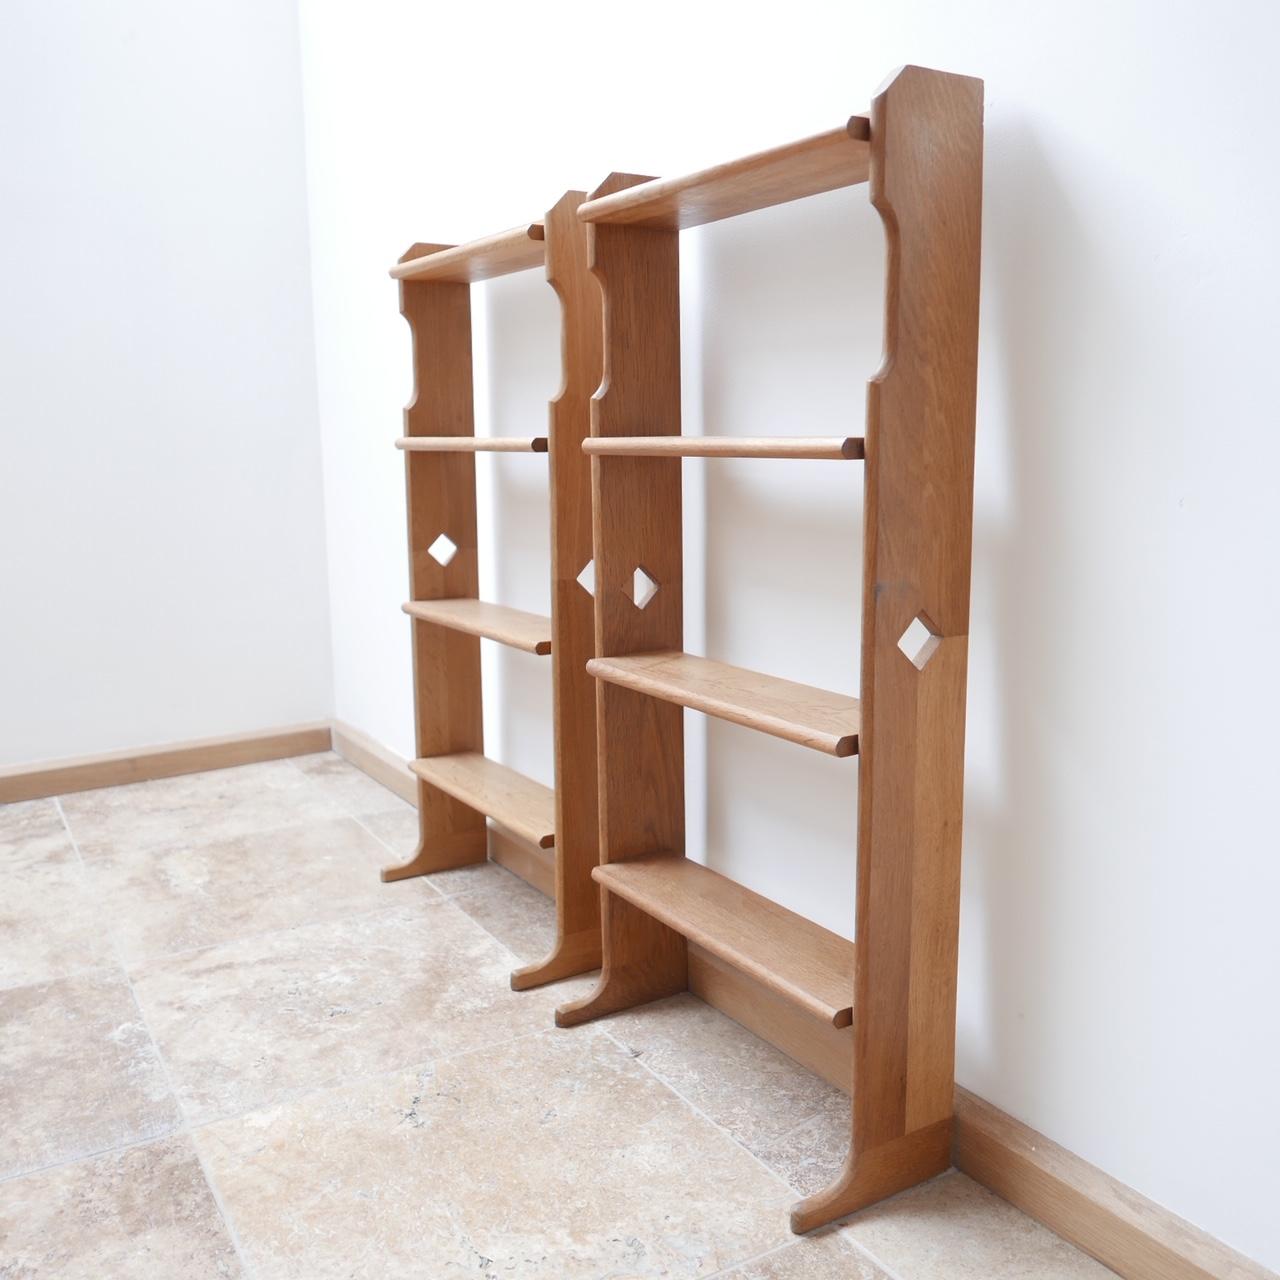 A pair of low bookcases or shelves by esteemed designers Guillerme et Chambron. 

French, circa 1960s, oak.

Ideal as small bookcases for nooks and crannies or beside sofas. 

Price is for the pair. 

Dimensions: 41 W x 85 H x 12 D x 20